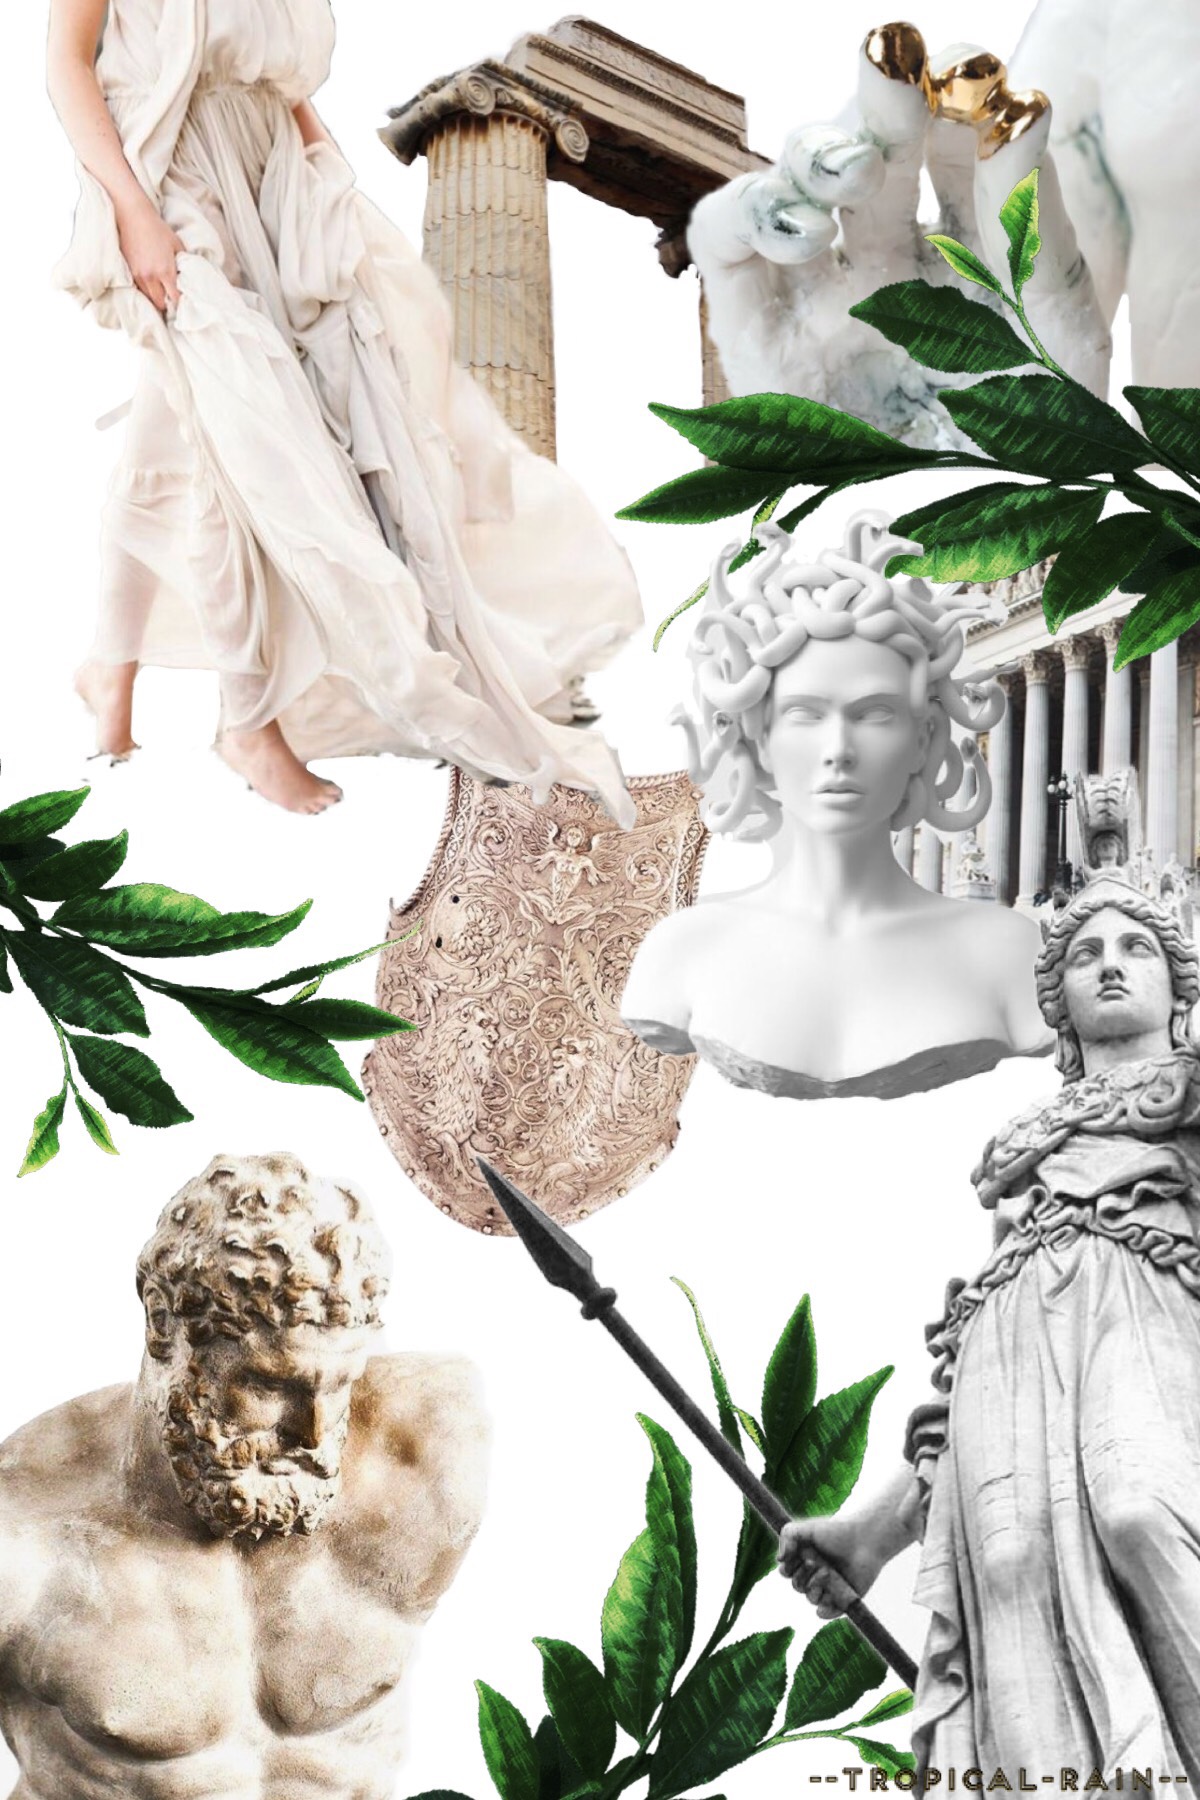 🏛 t a p 🏛
MY FIRST ACTUAL COLLAGE! YAY!🎉
This is kinda plain but I kinda like it
🏛🏛🏛🏛🏛🏛🏛🏛🏛🏛🏛🏛🏛🏛🏛🏛🏛🏛🏛🏛🏛🏛🏛🏛🏛🏛🏛🏛🏛🏛🏛🏛🏛🏛🏛🏛🏛🏛🏛🏛🏛🏛🏛🏛🏛🏛🏛🏛